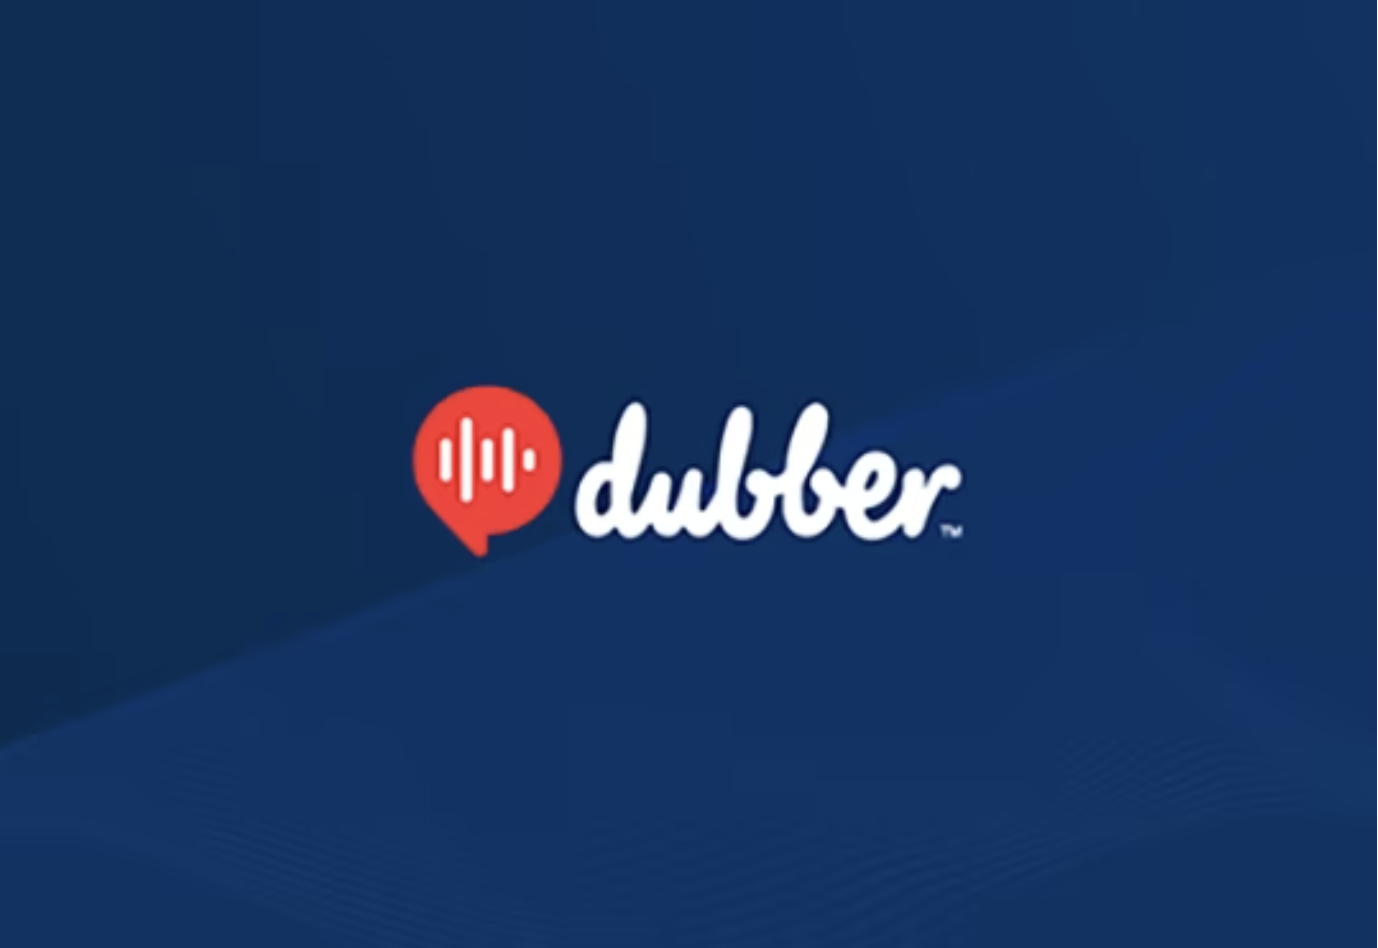 Press Release: Dubber to Provide Cloud Call Recording for CBTS